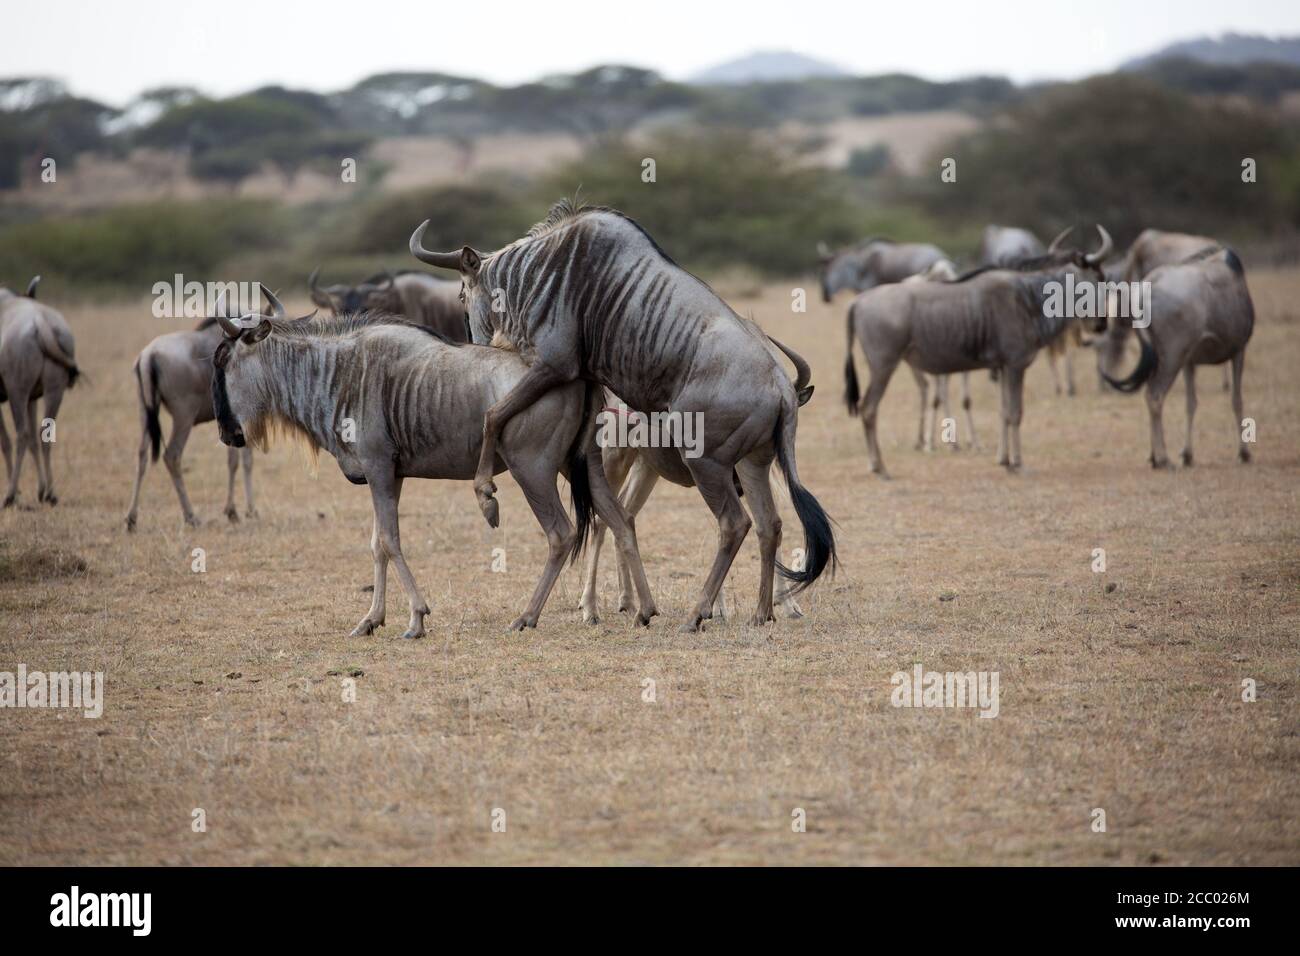 A Wildebeest (Connochaetes) mating in southern Kenya Stock Photo - Alamy